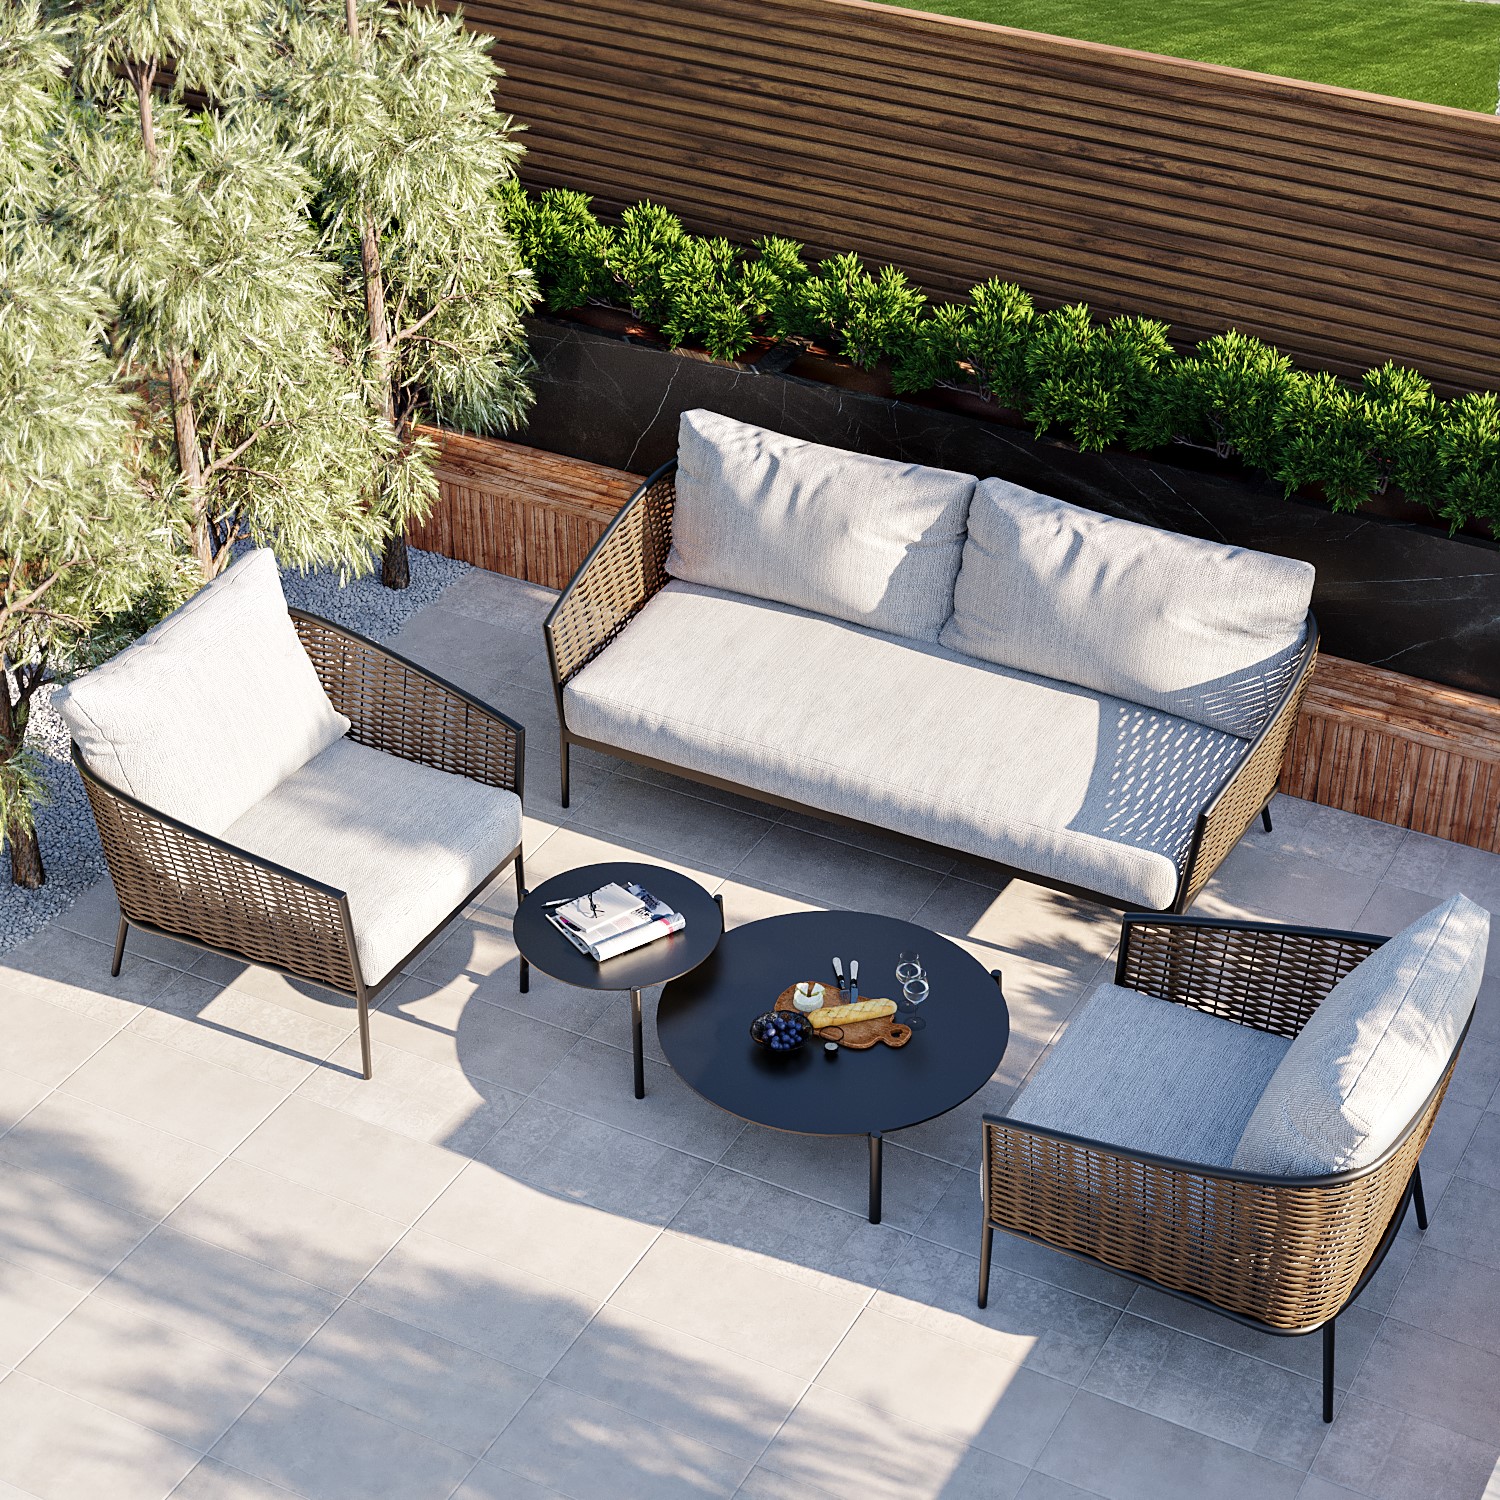 Read more about 4 seater garden sofa set with wicker woven chairs & 2 tables como